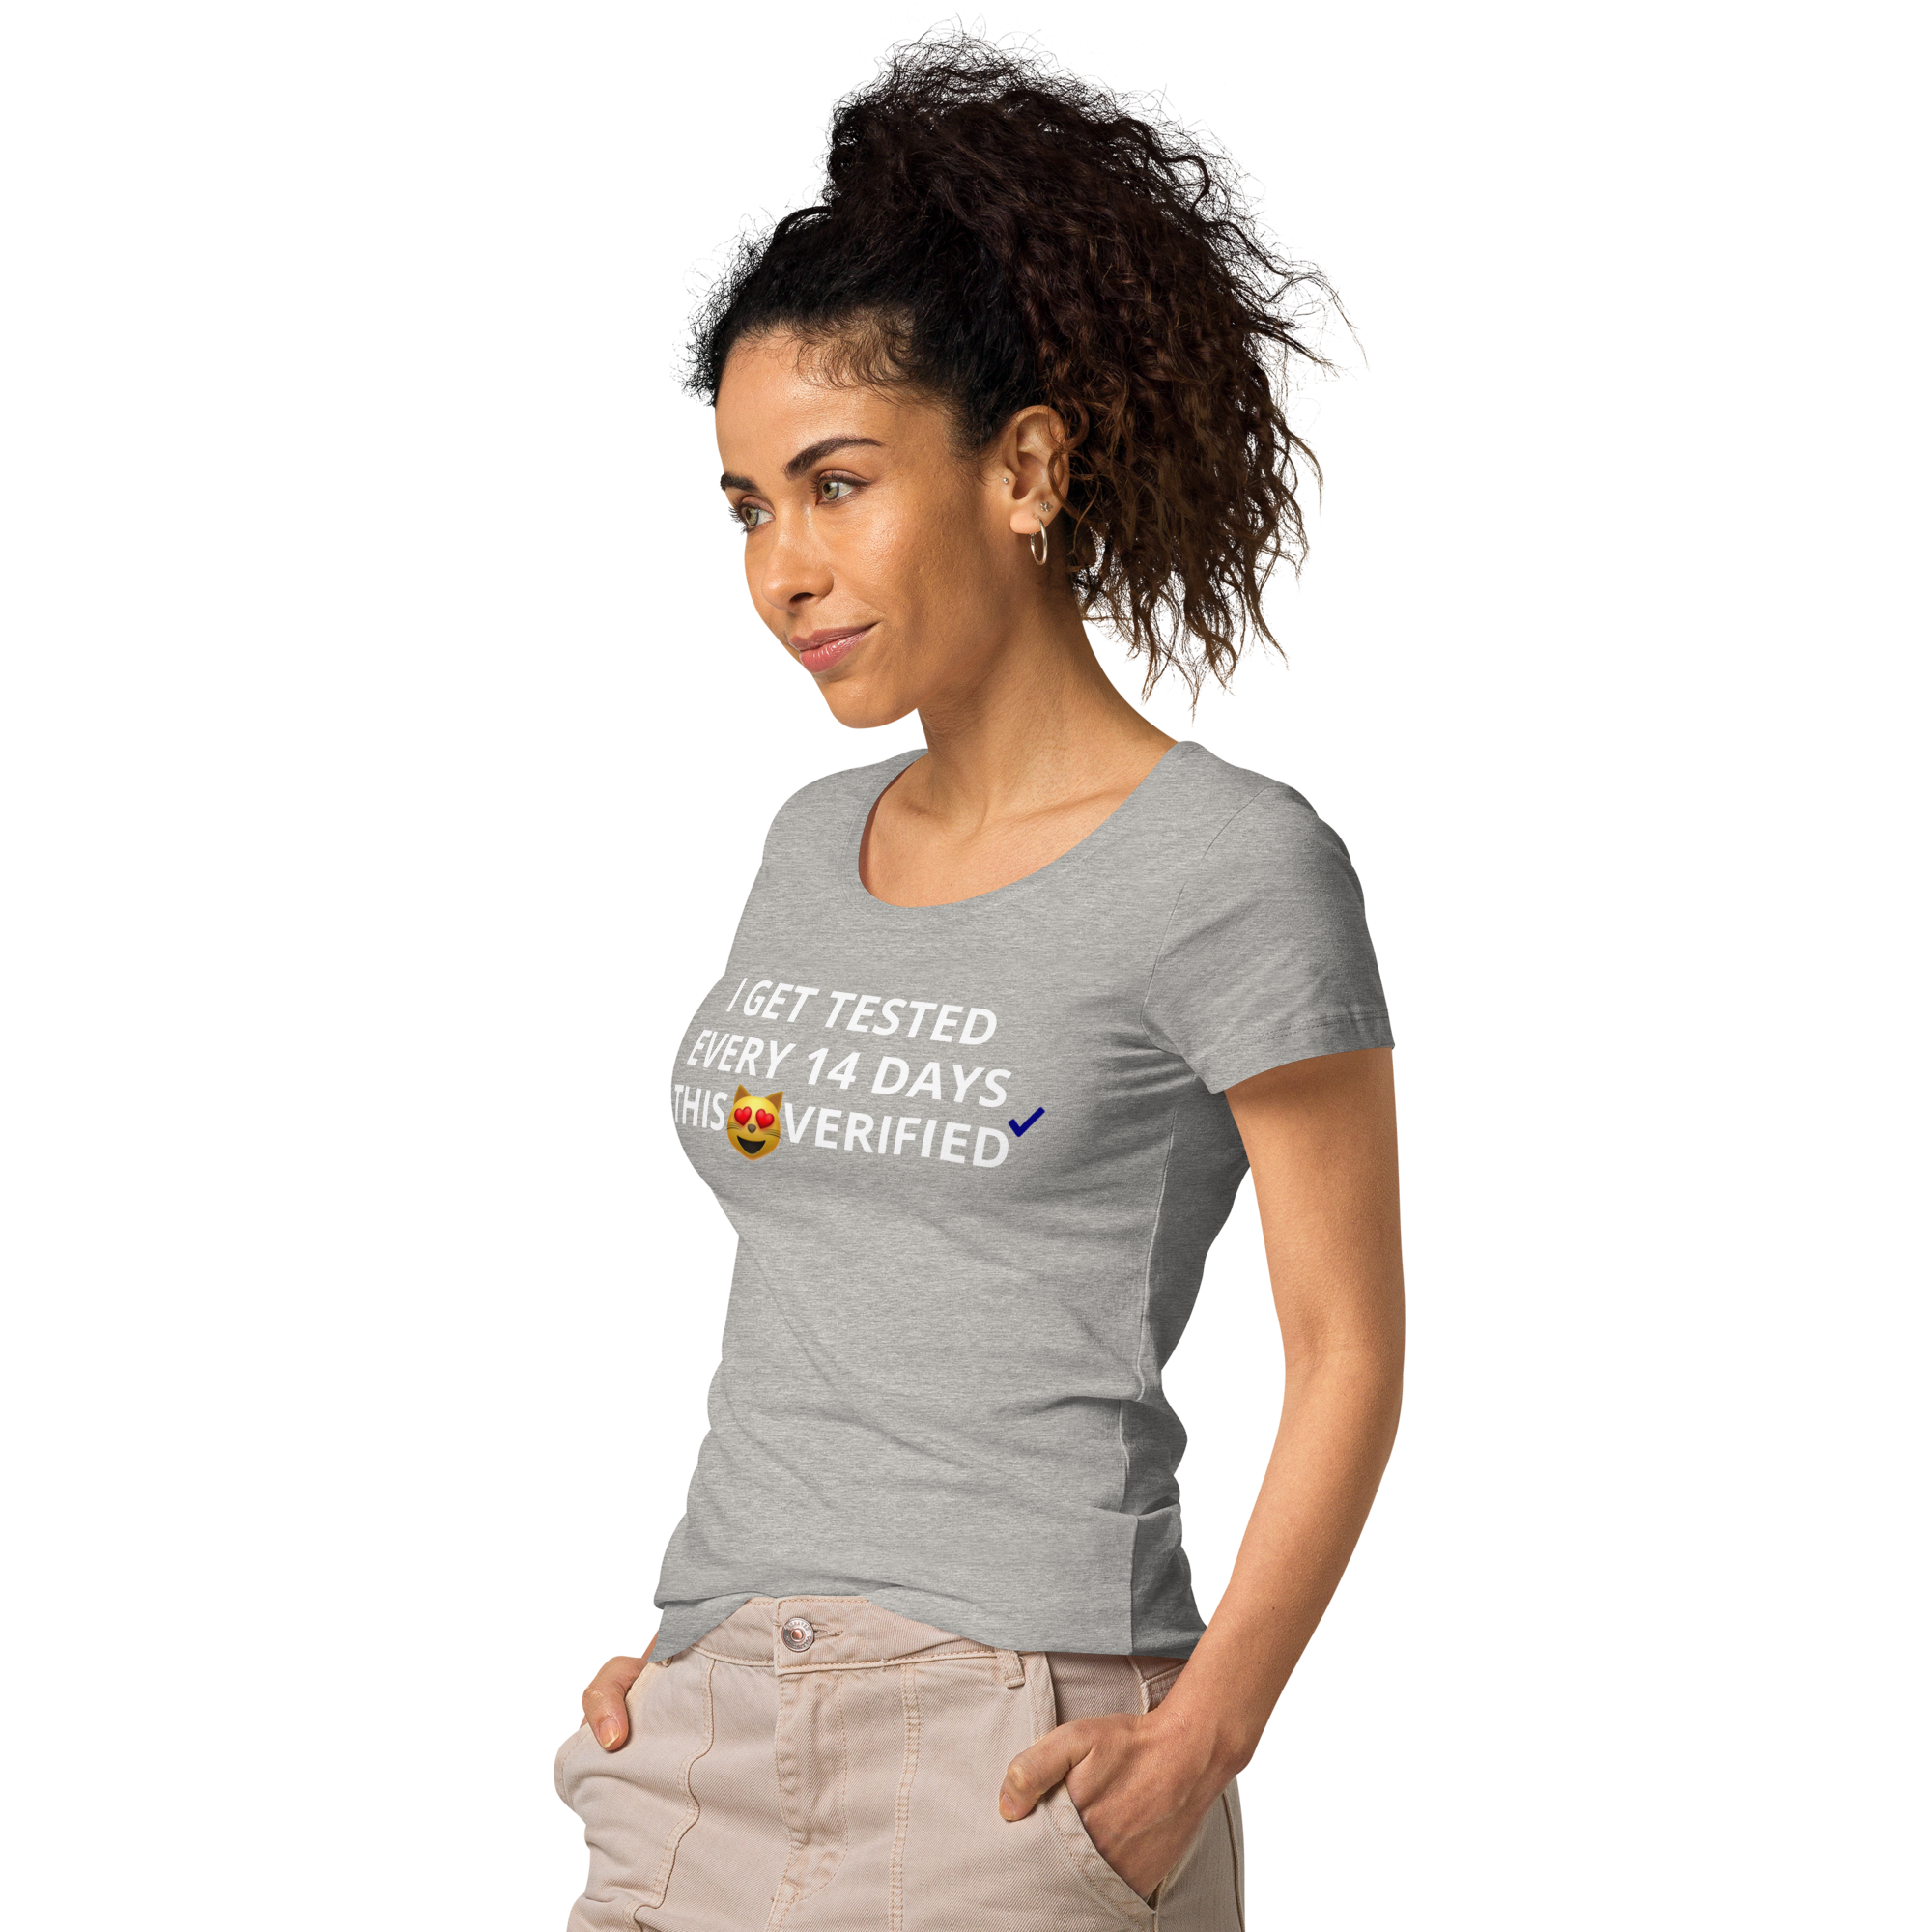 Women’s basic organic t-shirt I GET TESTED EVERY 14 DAYS THIS P****VERIFIED